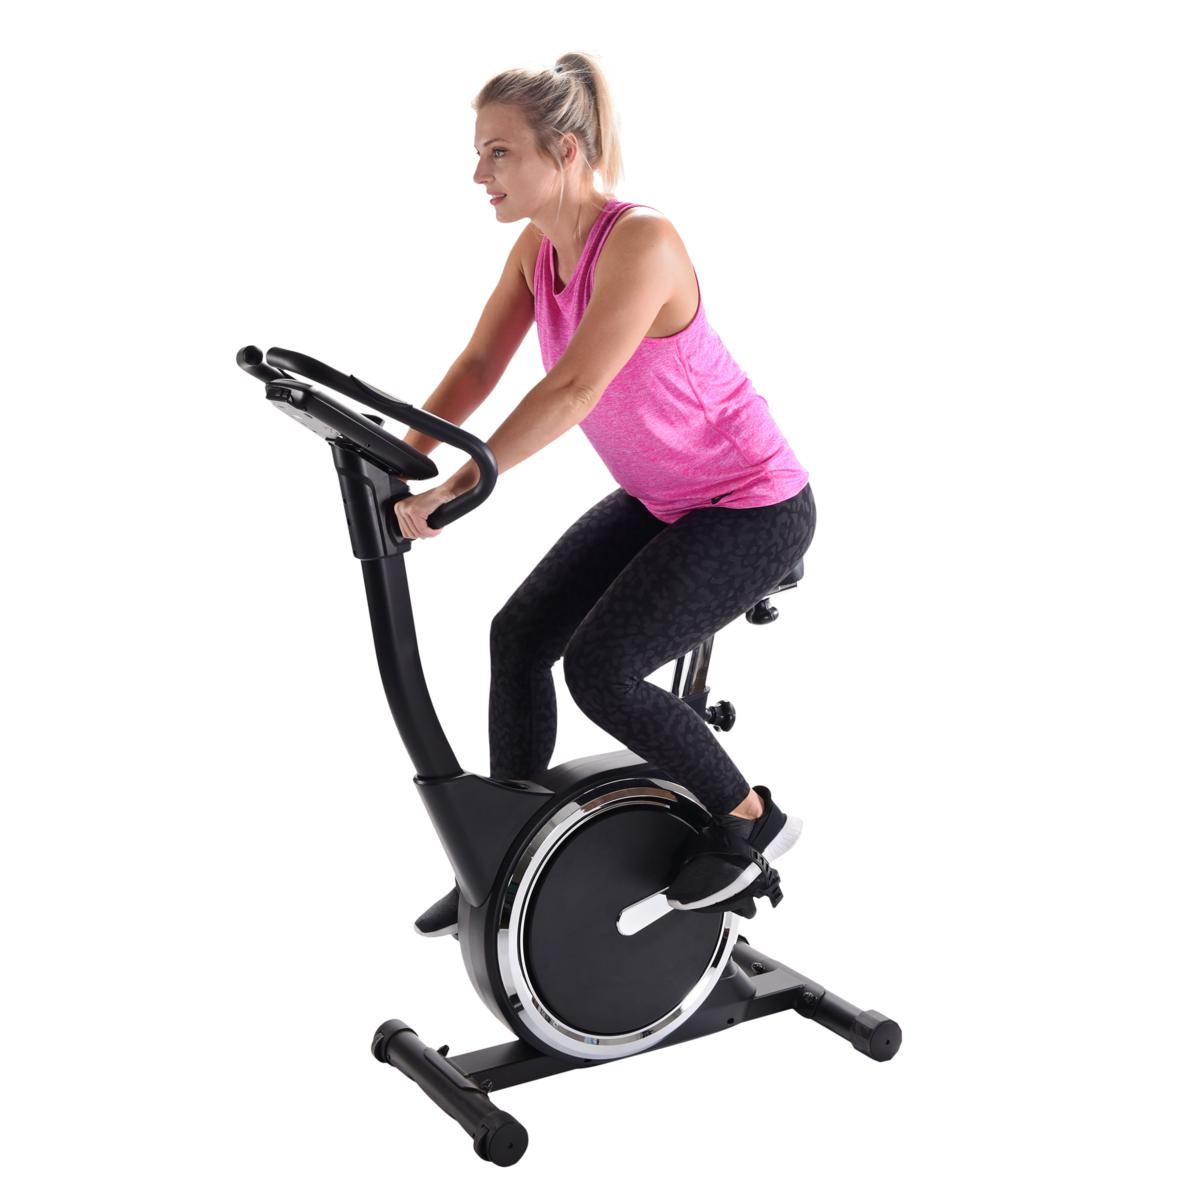 Review of the HSN Exercise Bike